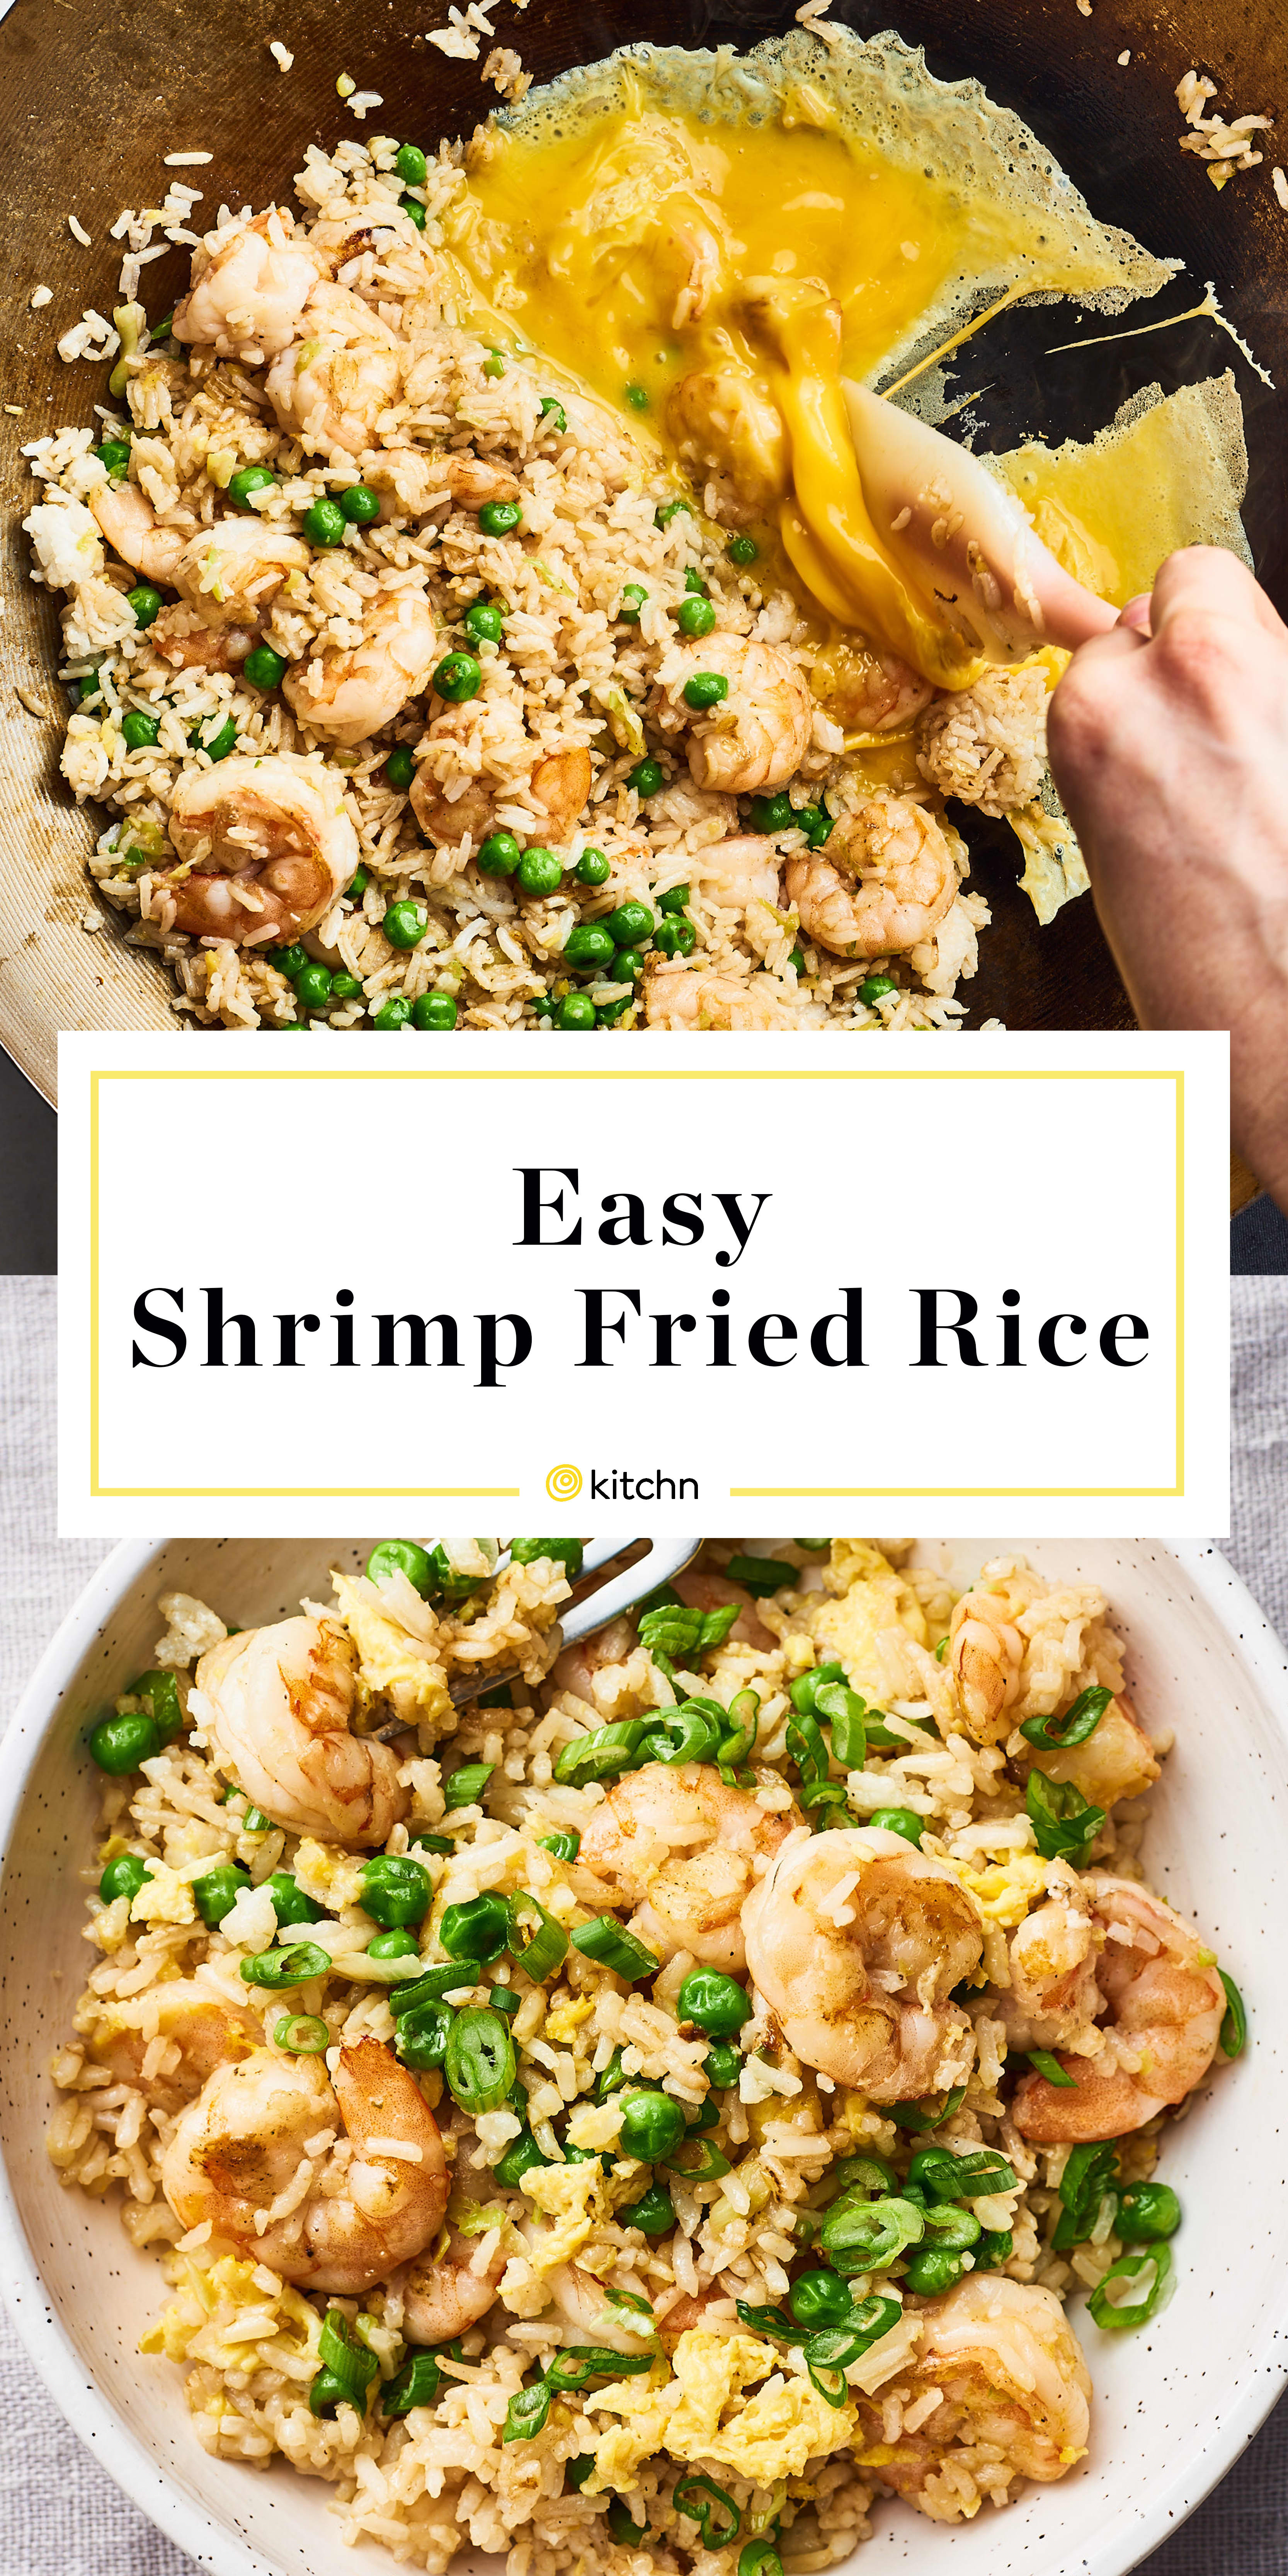 How To Make Easy Shrimp Fried Rice That’s Even Better than Takeout | Kitchn